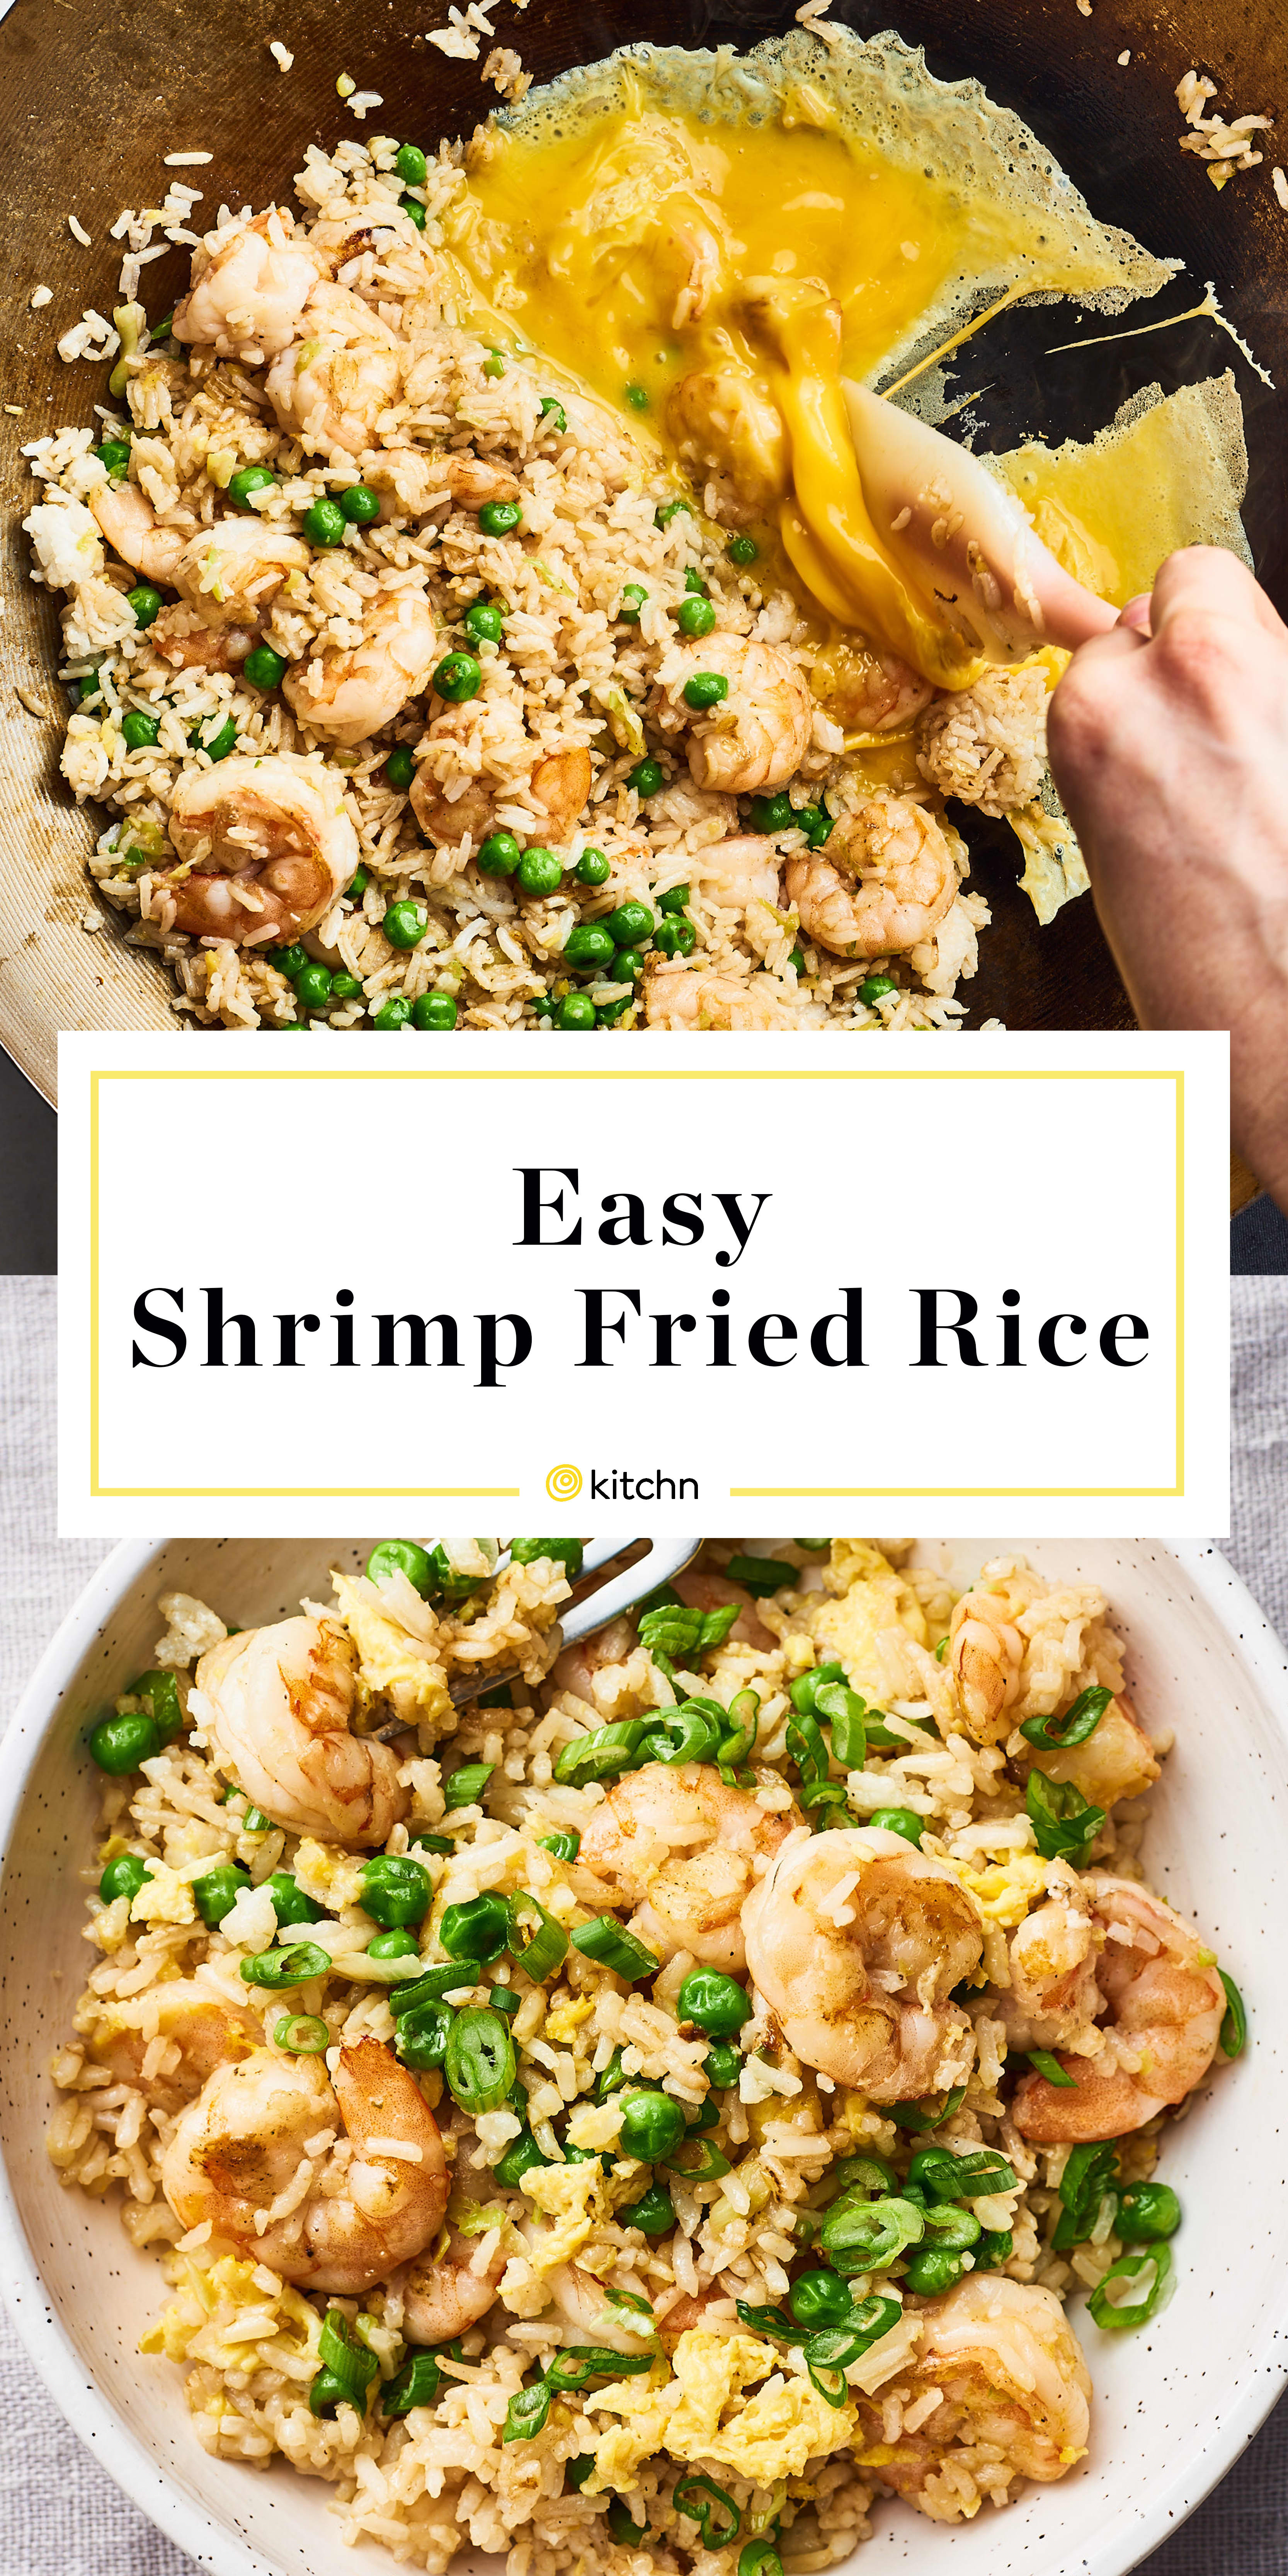 How To Make Easy Shrimp Fried Rice That’s Even Better than Takeout | Kitchn